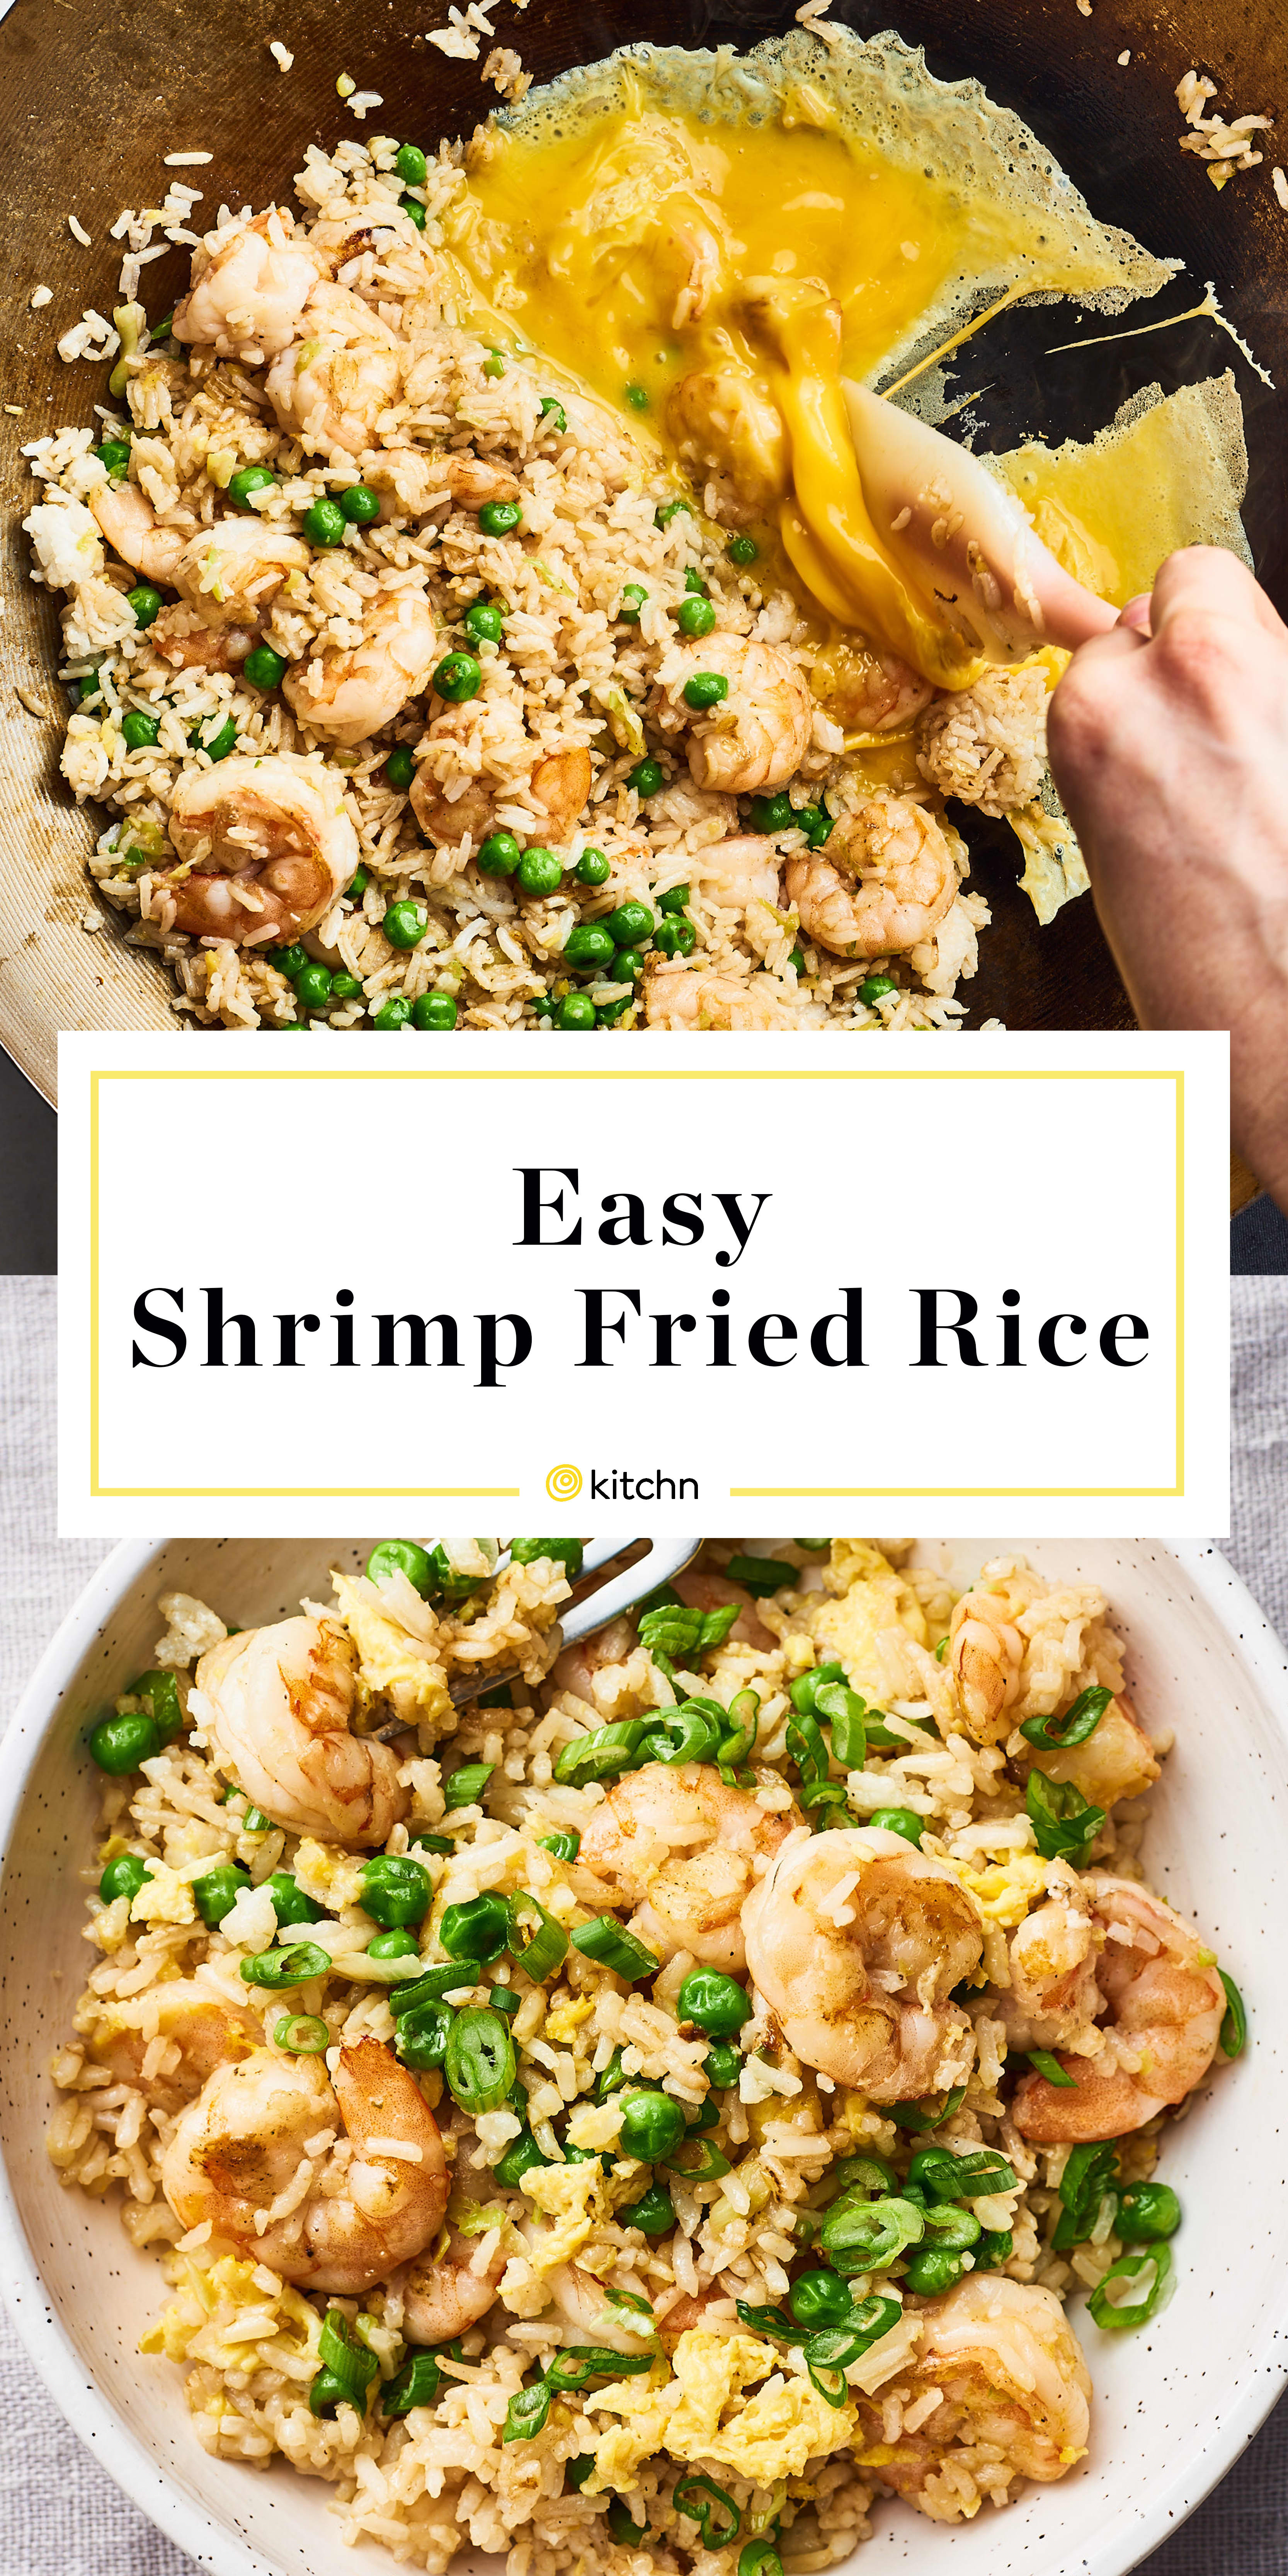 How To Make Easy Shrimp Fried Rice That’s Even Better than Takeout | Kitchn